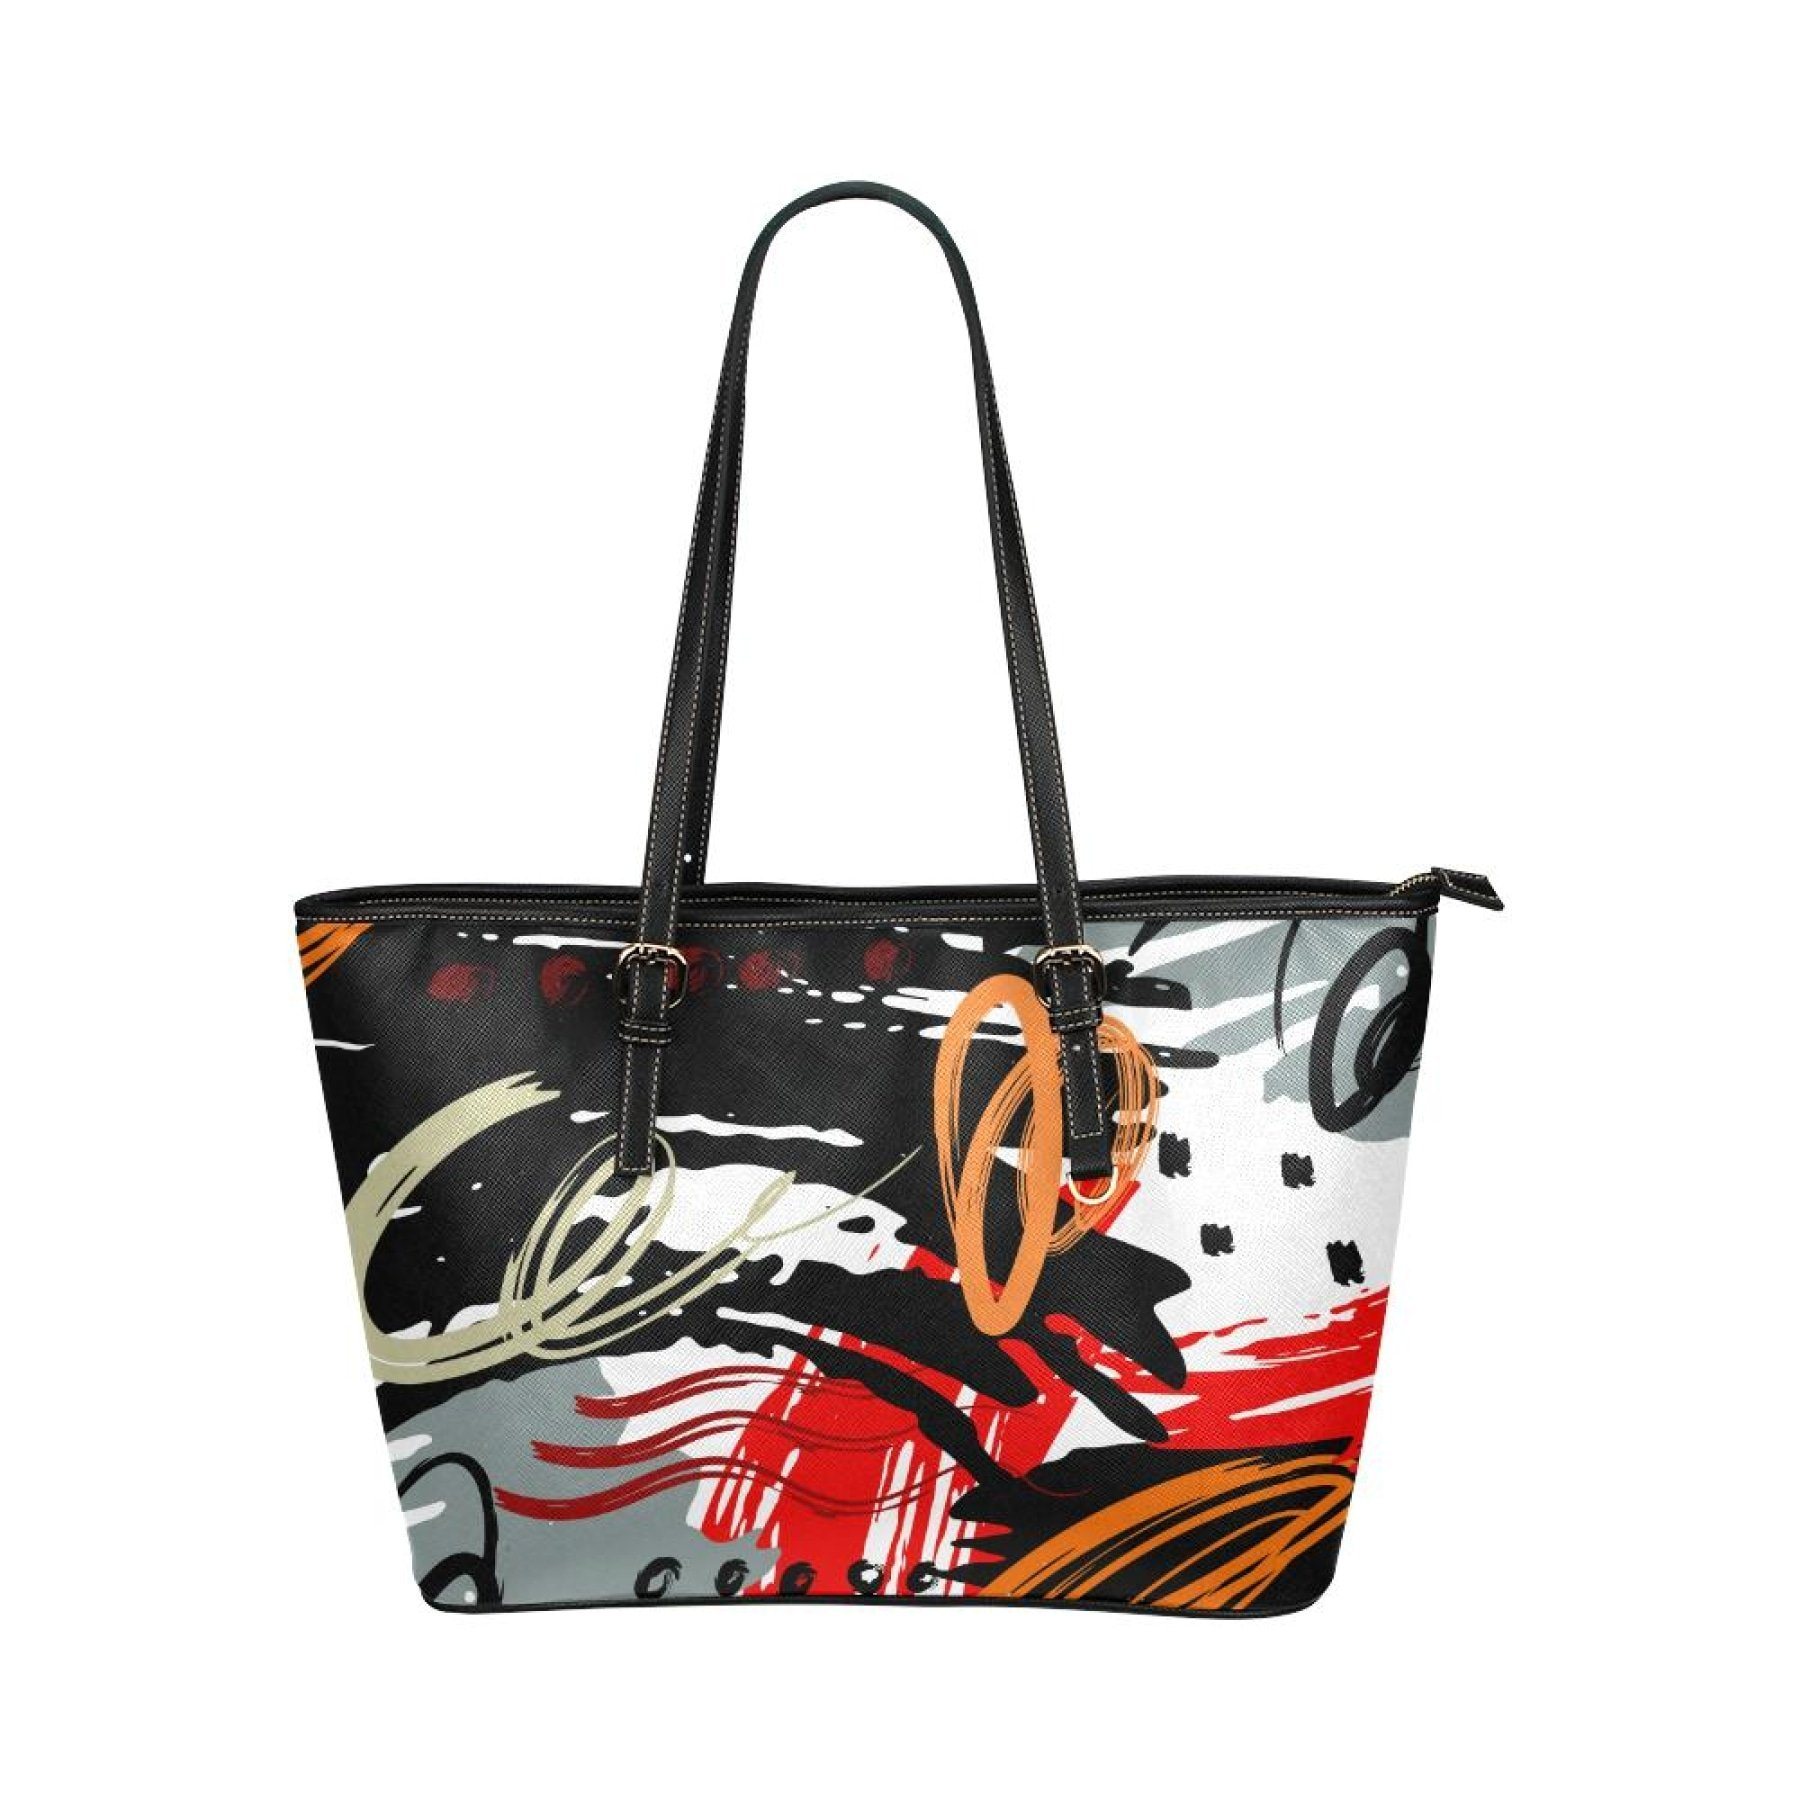 Black, Red, And Gray Abstract Style Leather Tote Bag 6